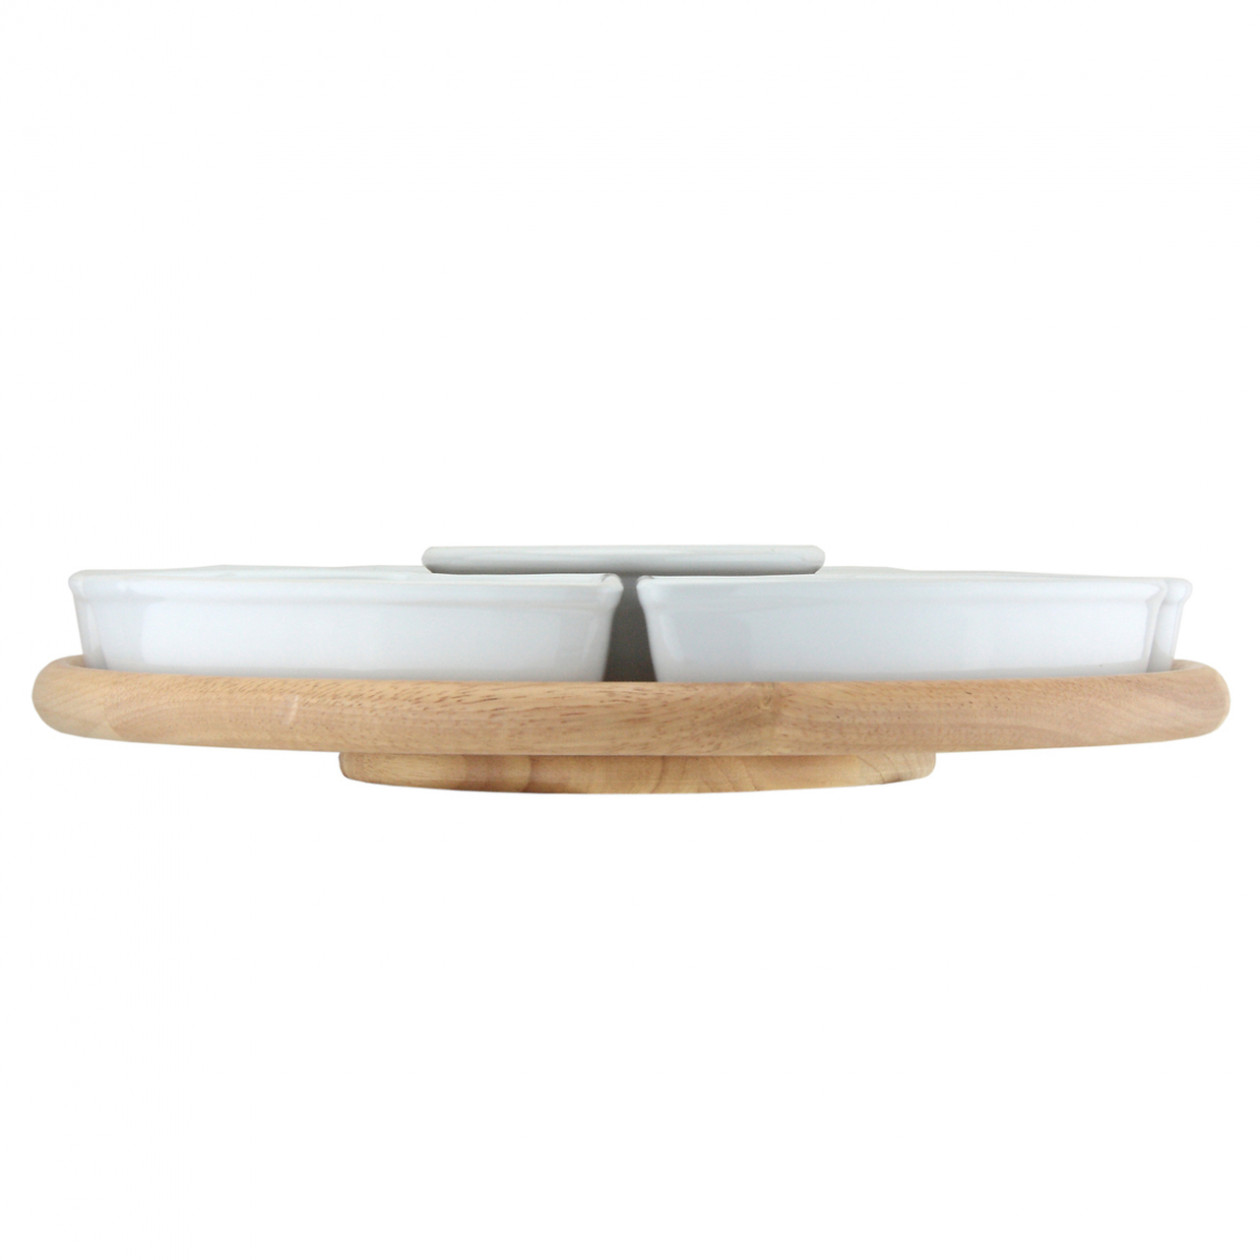 Apollo RB Lazy Susan with CER Dishes, ceramic, Multi-Colour, 35x8.5x35